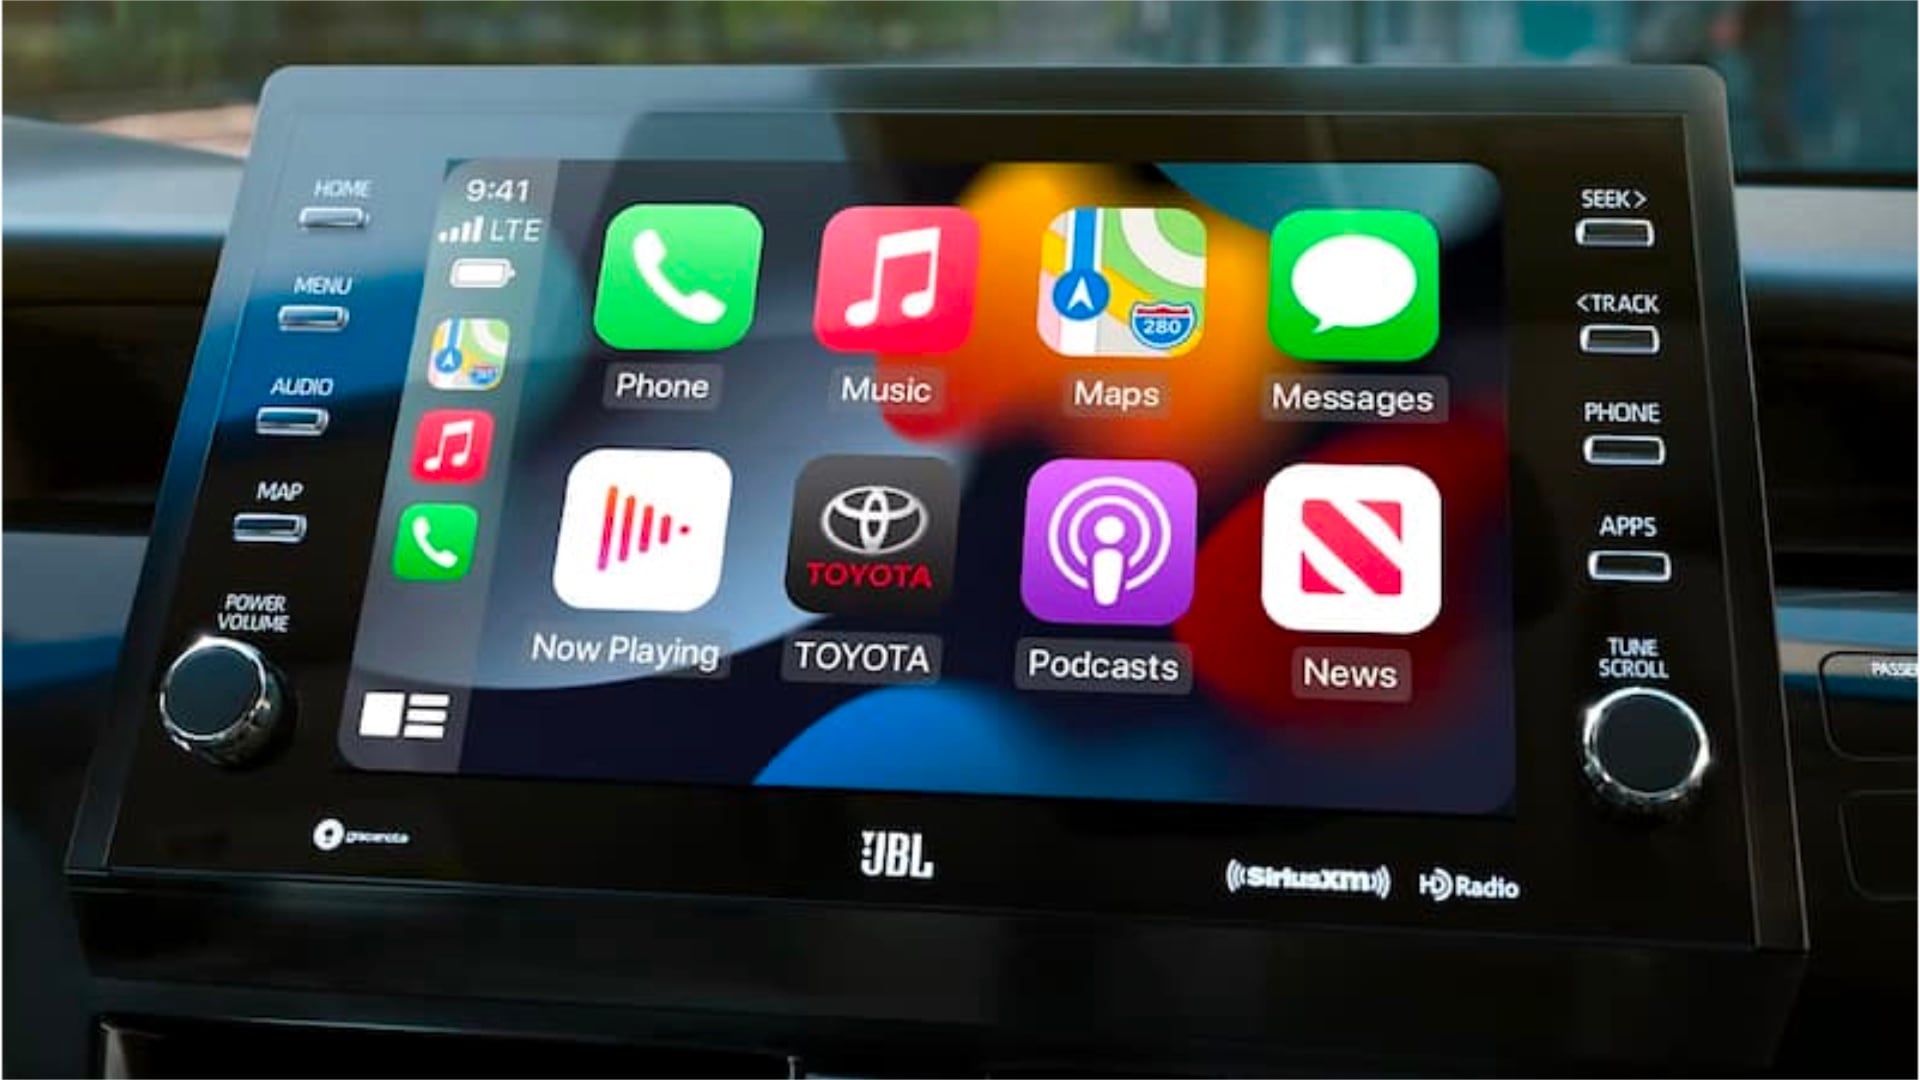 Interior view of a Toyota with frame filled by screen displaying Apple CarPlay UI